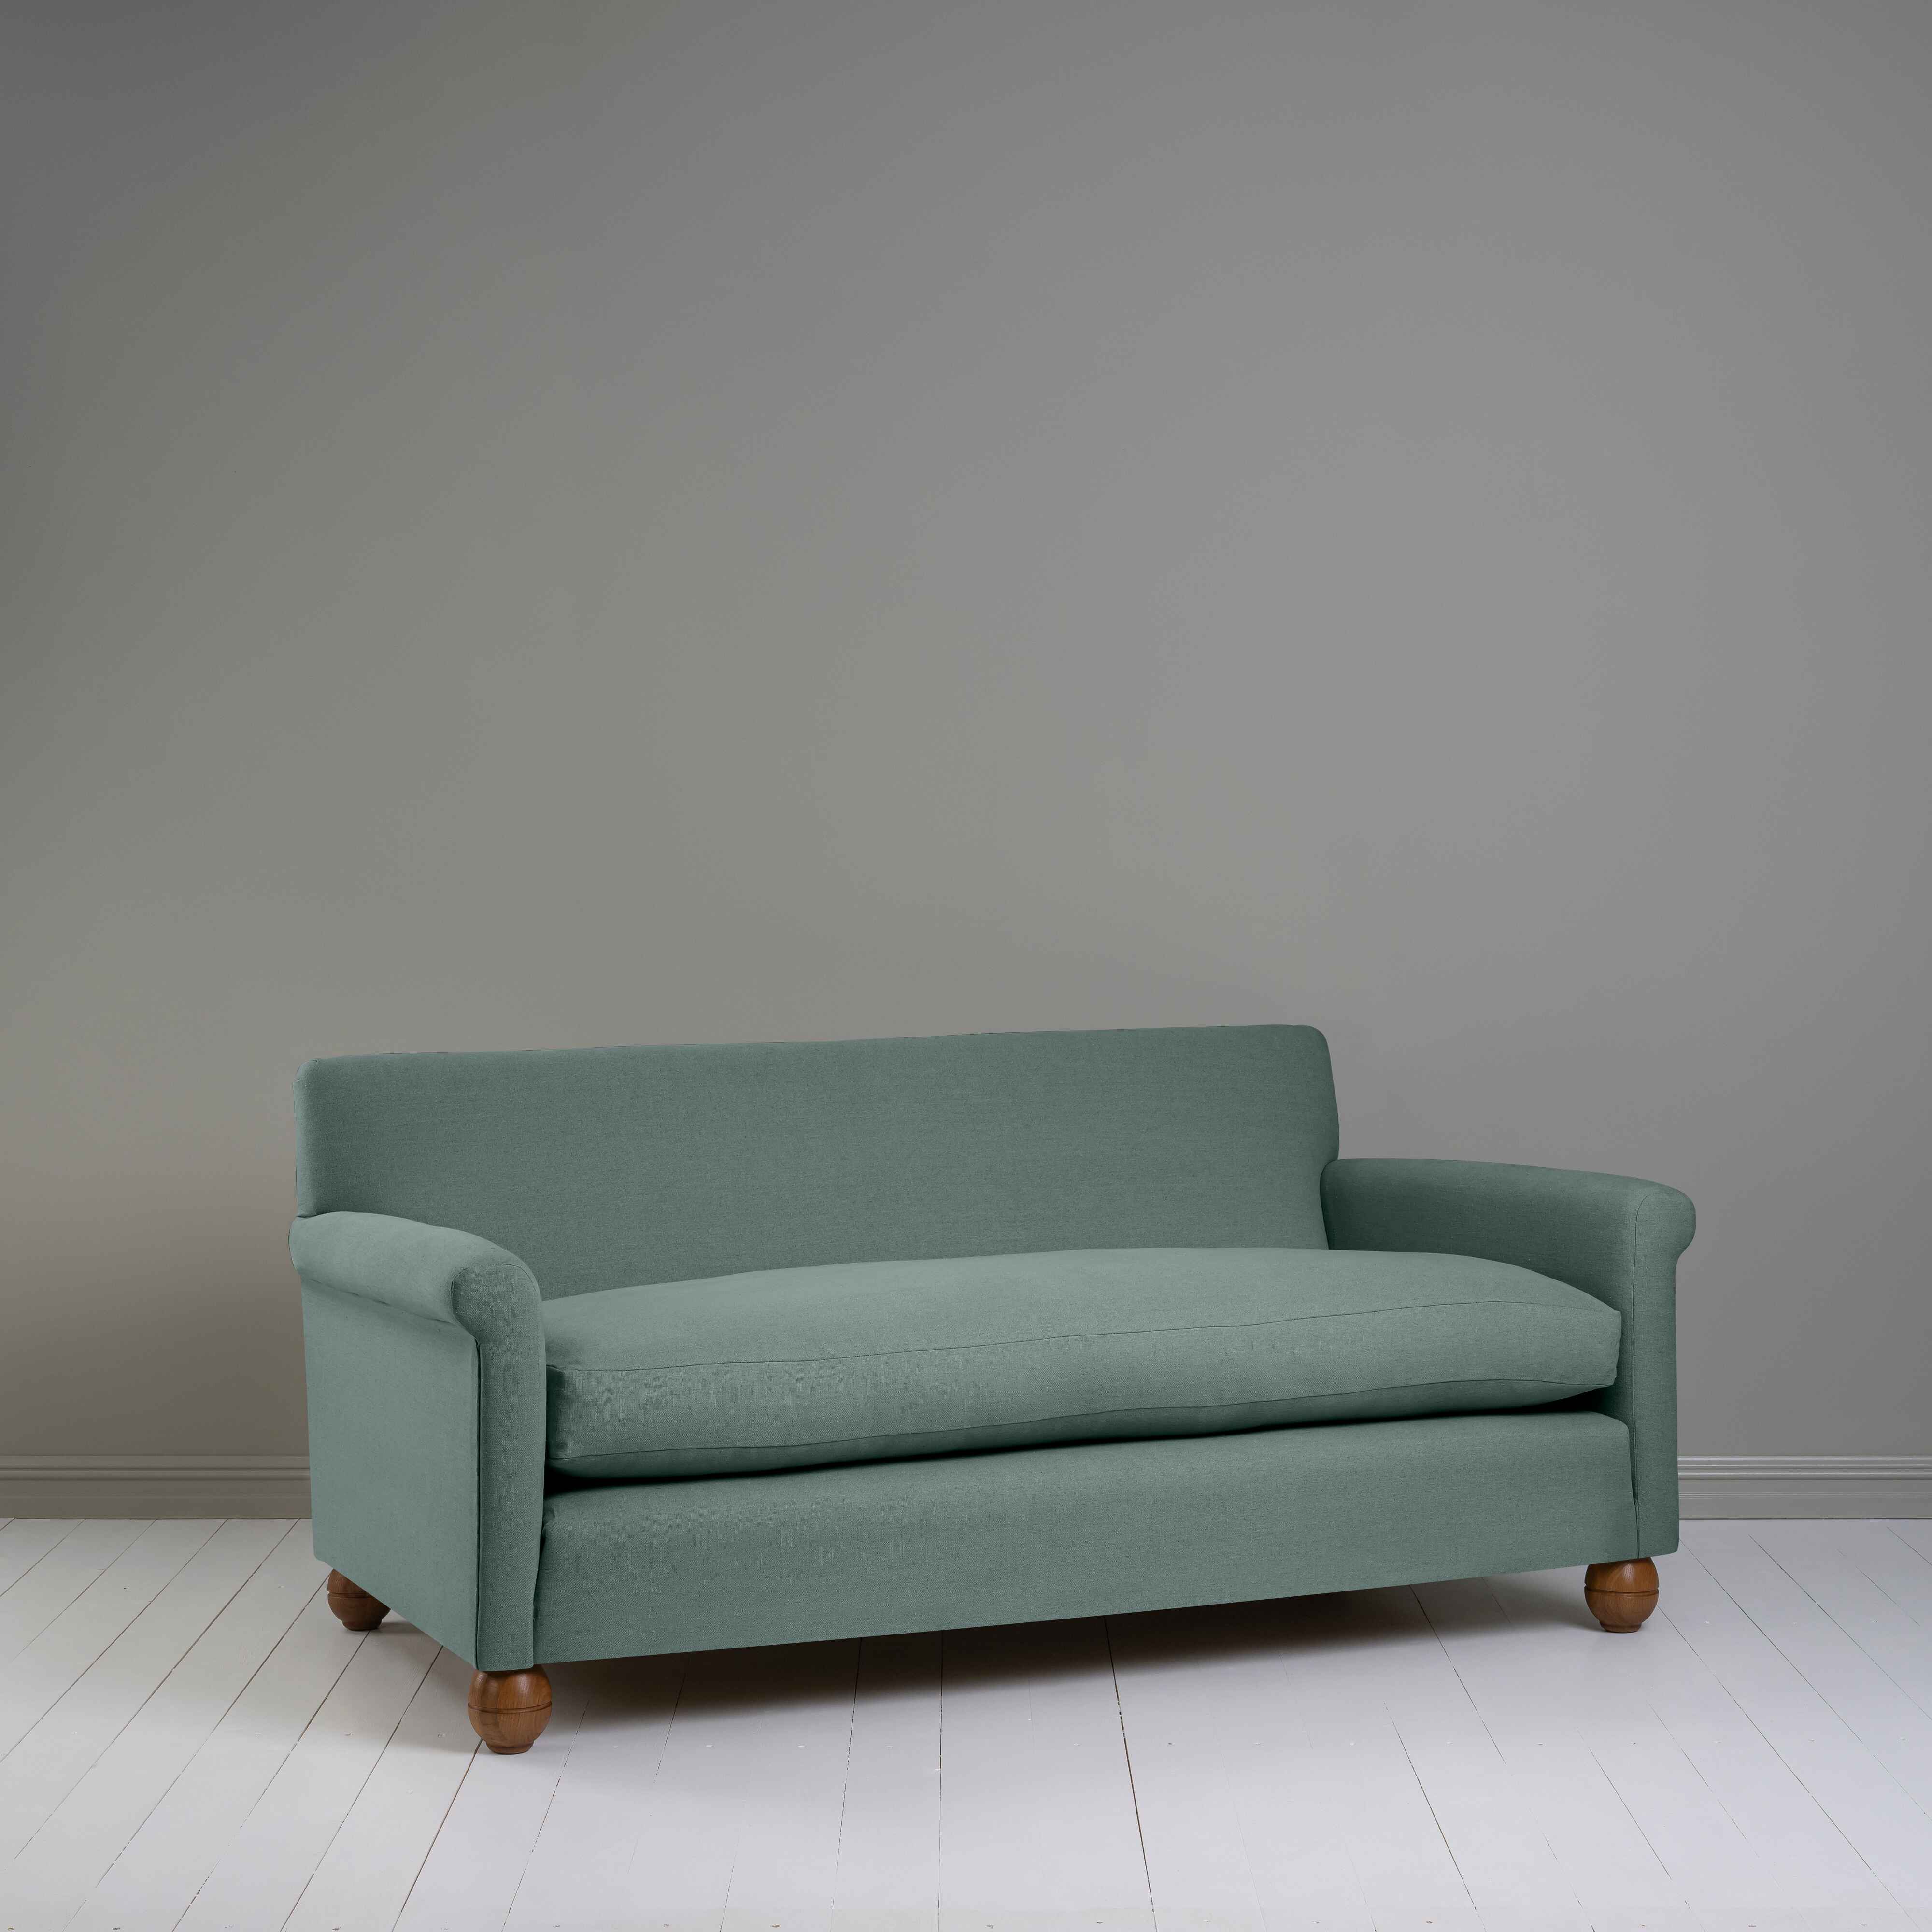  Idler 3 Seater Sofa in Laidback Linen Mineral 